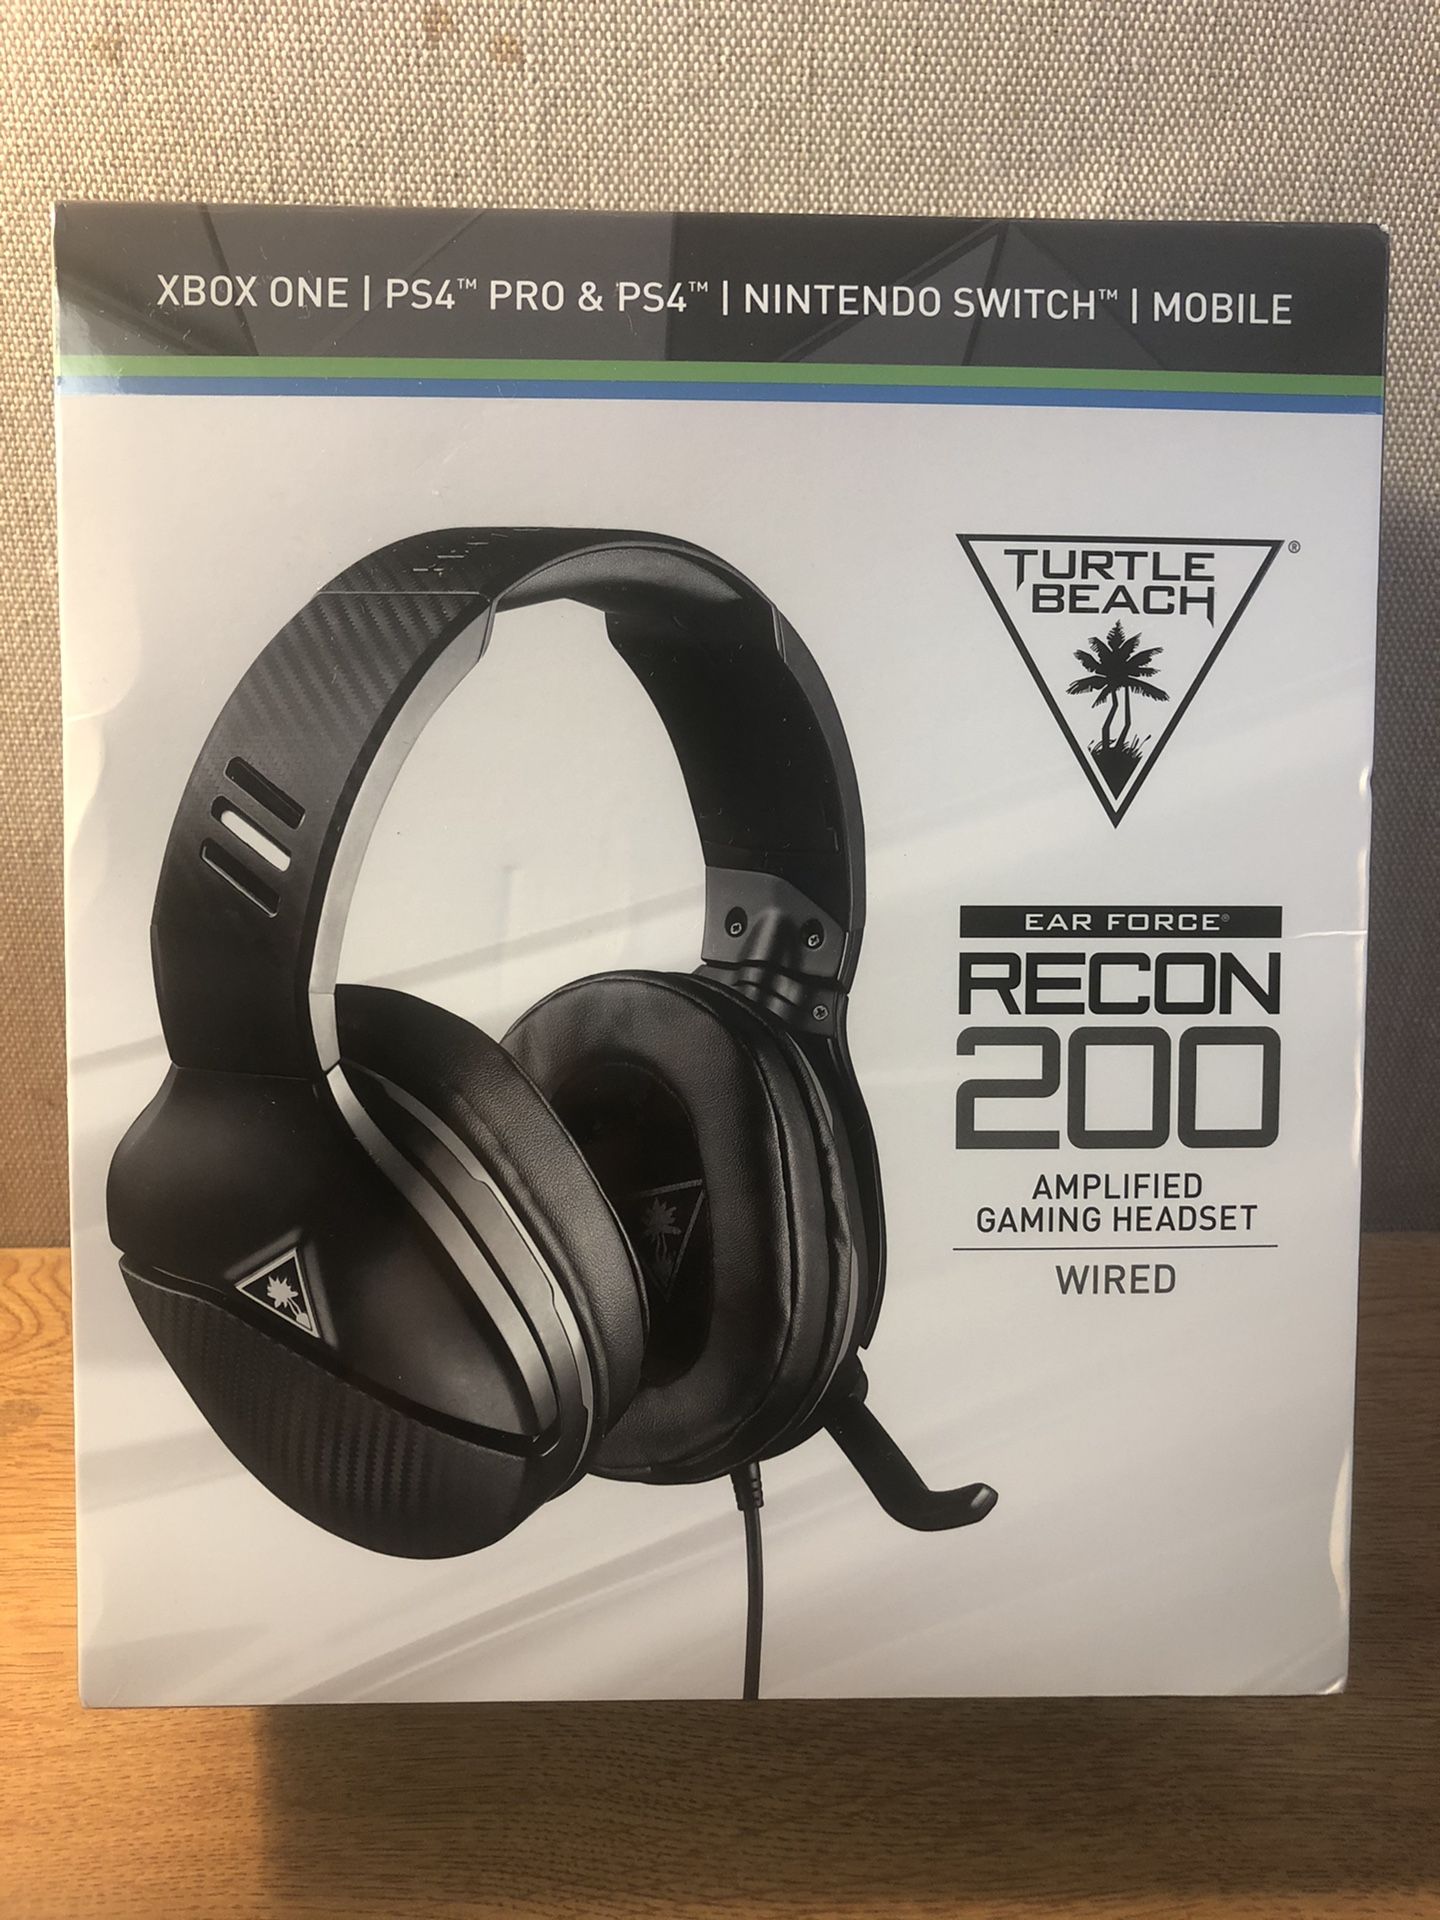 Turtle Beach Ear Force Recon 200 Gaming Headset